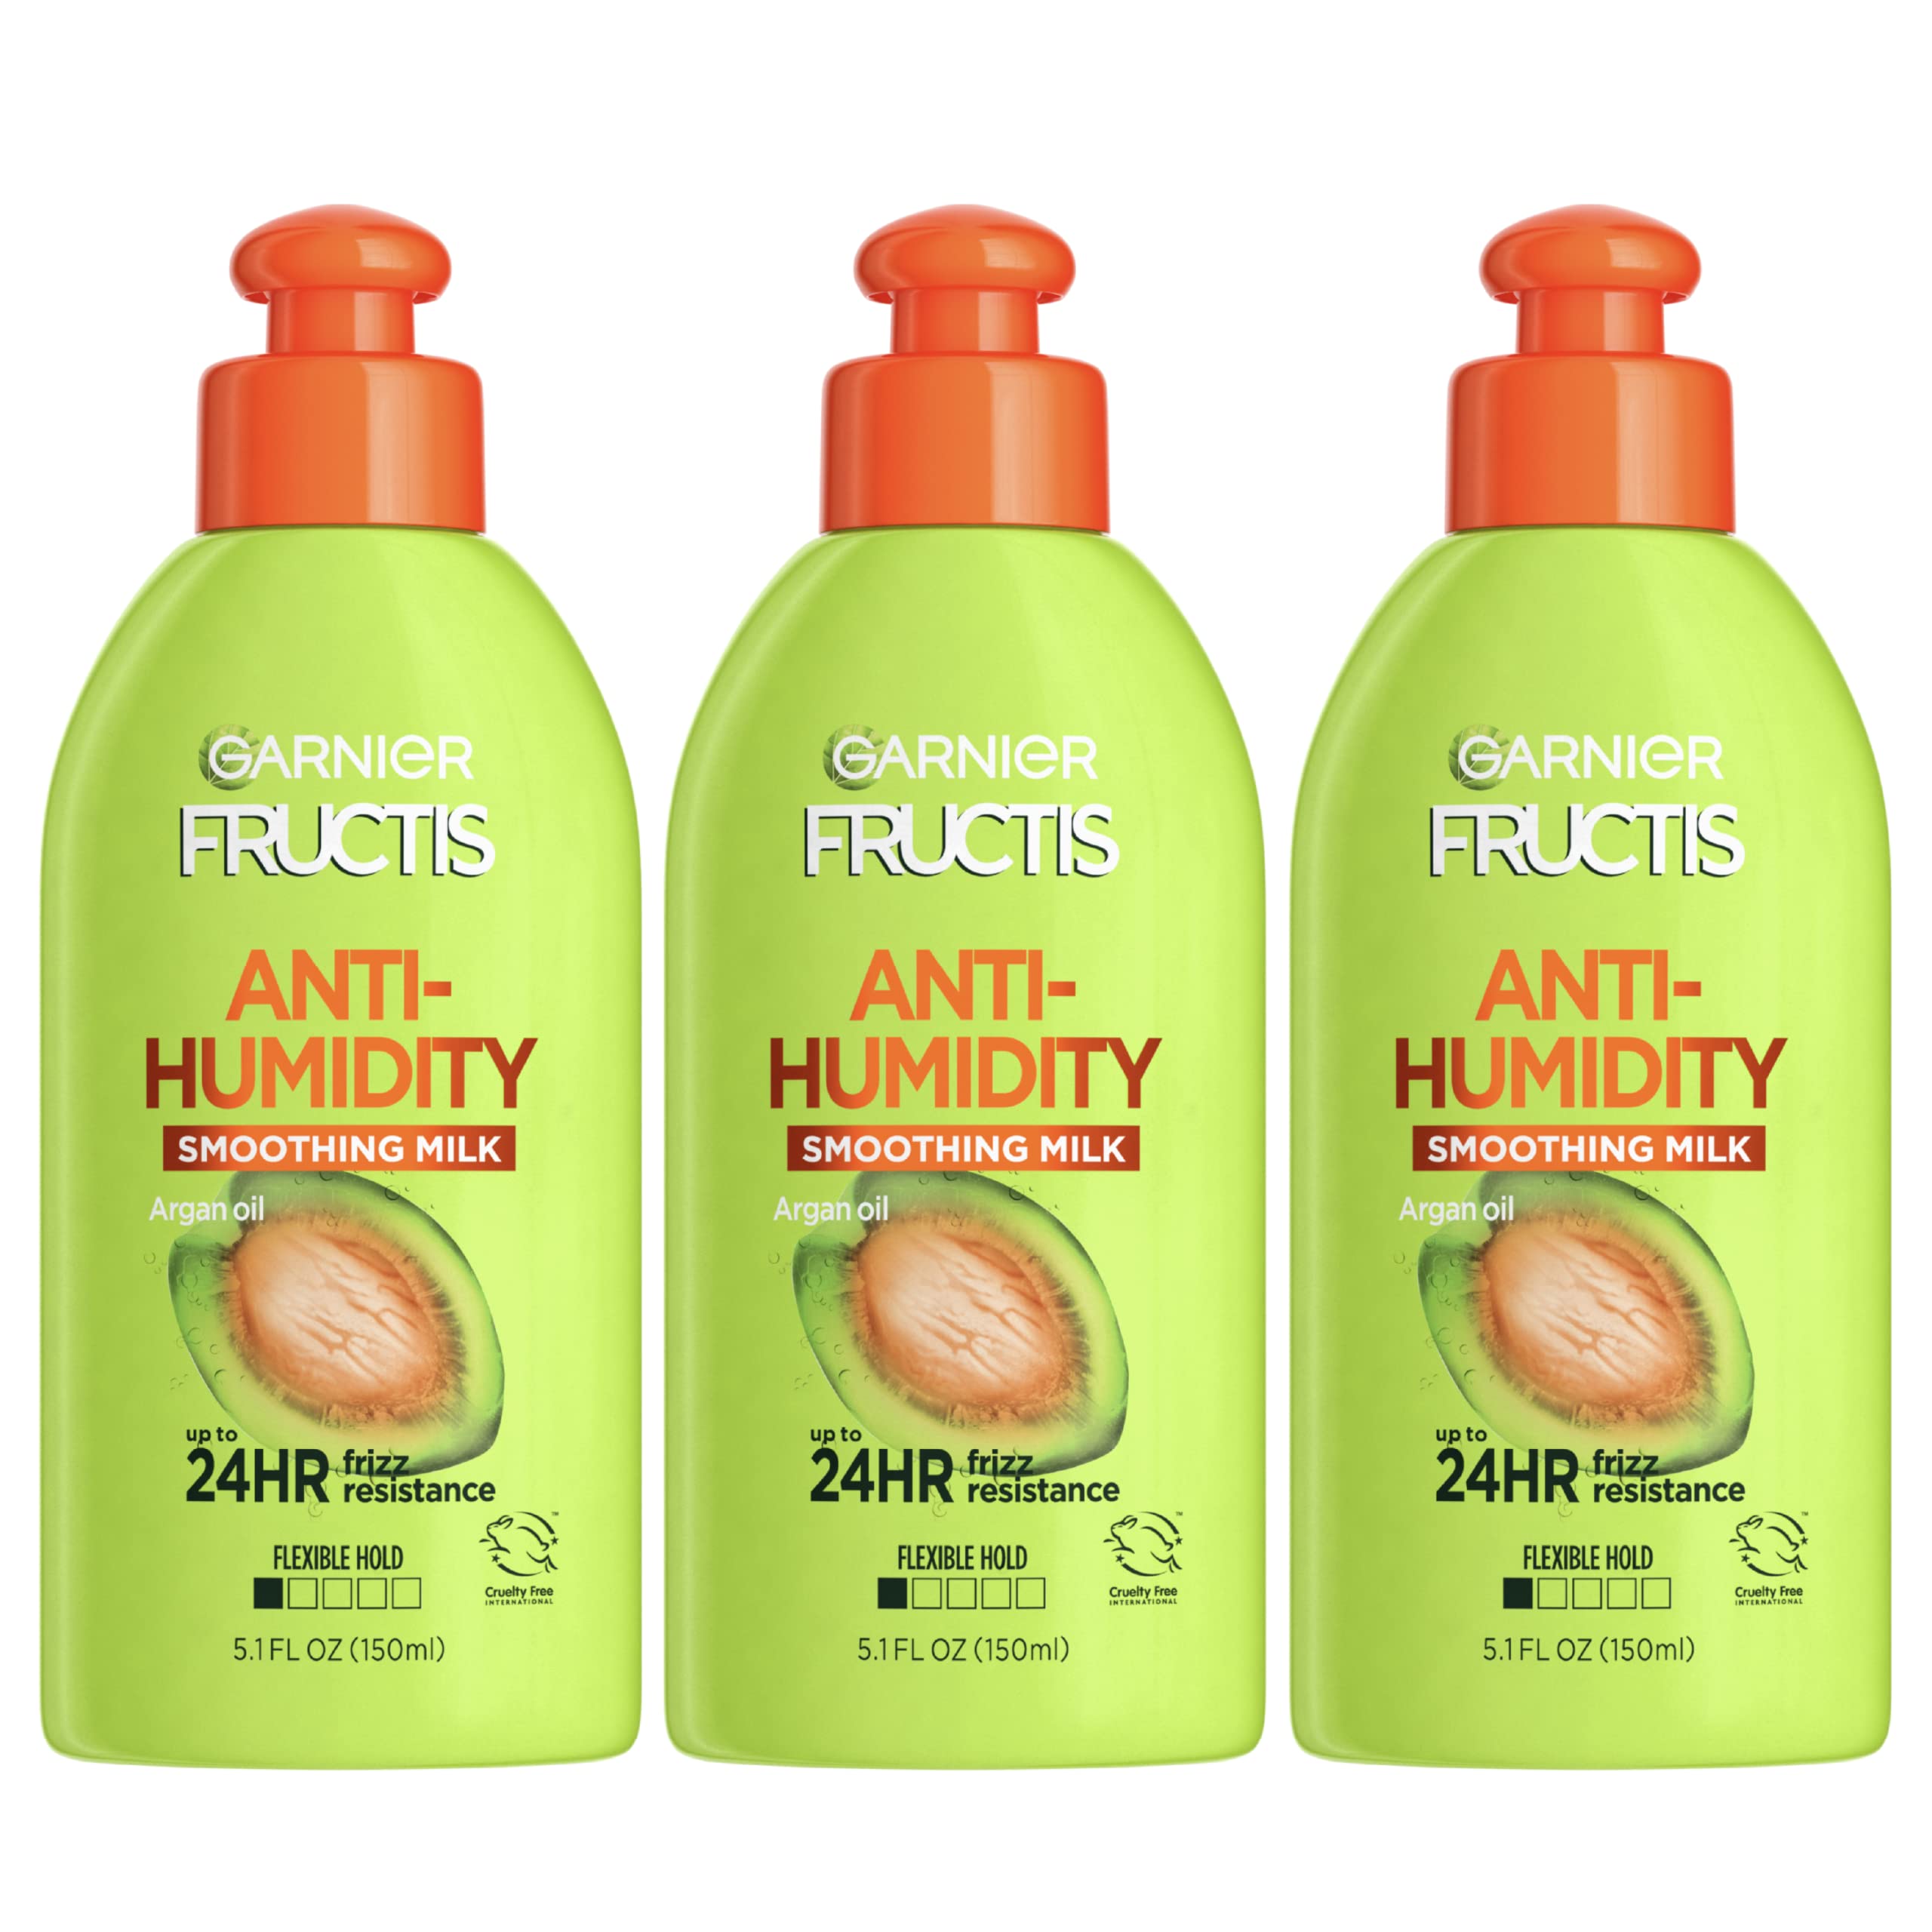 Garnier Fructis Style Anti-Humidity Smoothing Milk for Frizzy Hair,   Ounce Bottle, 3 Count 3 Count (Pack of 1) Sleek